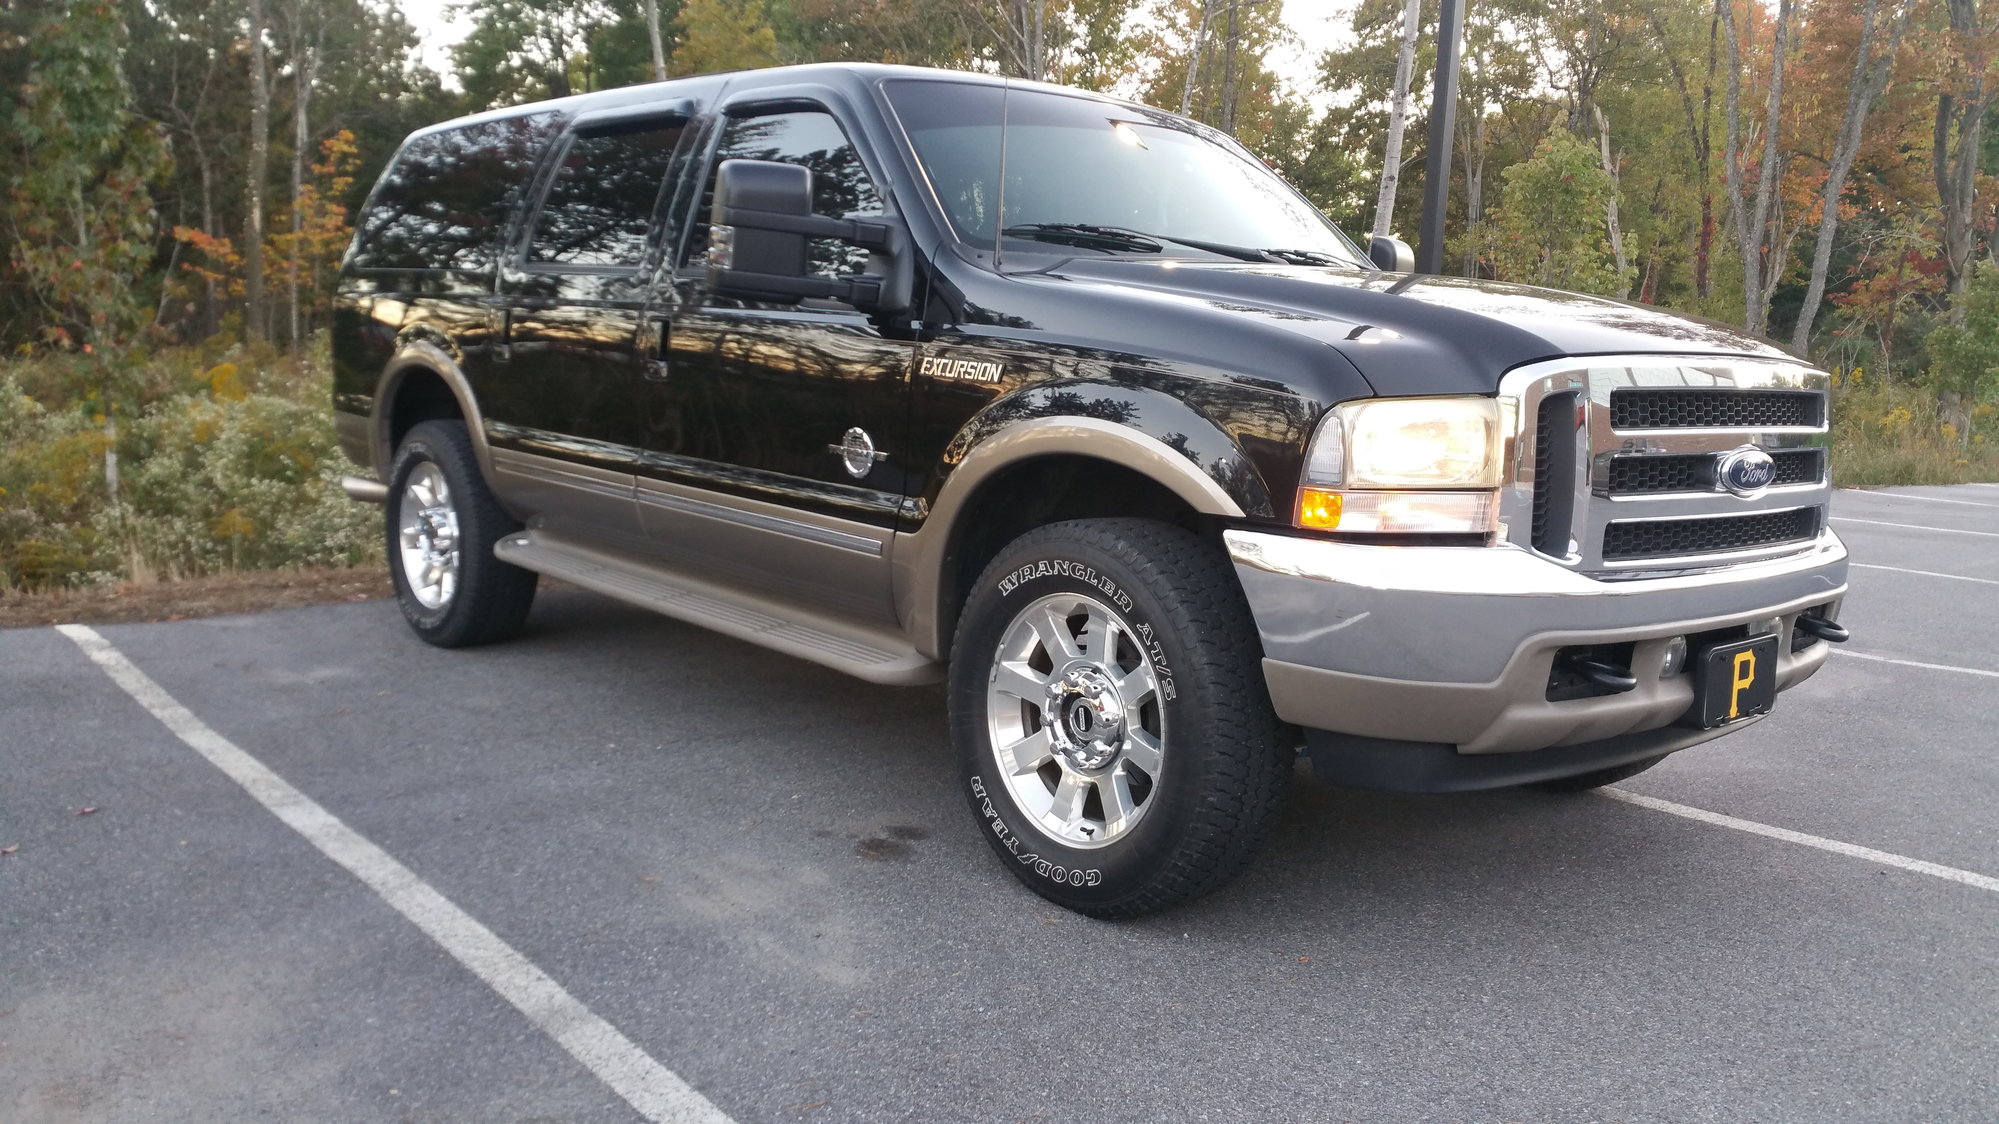 2002 ford excursion oil type